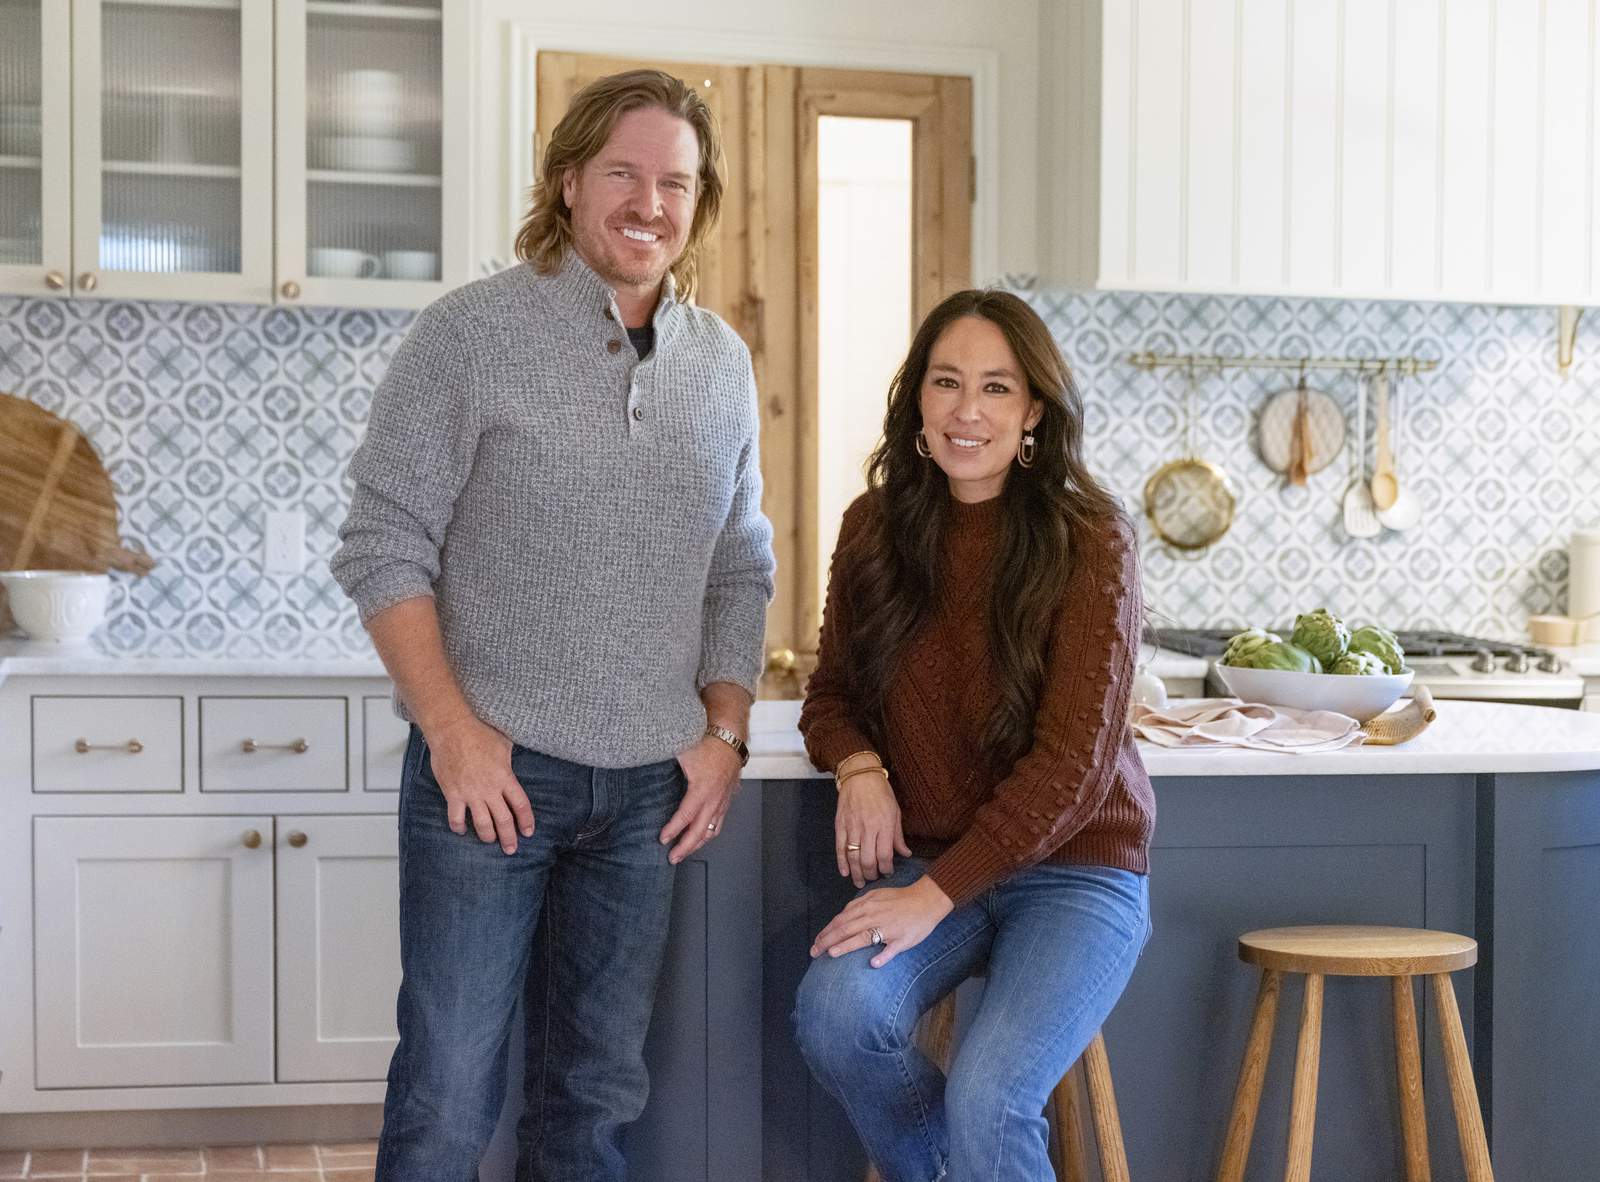 Chip and Joanna Gaines' Magnolia Network debuts January 2022